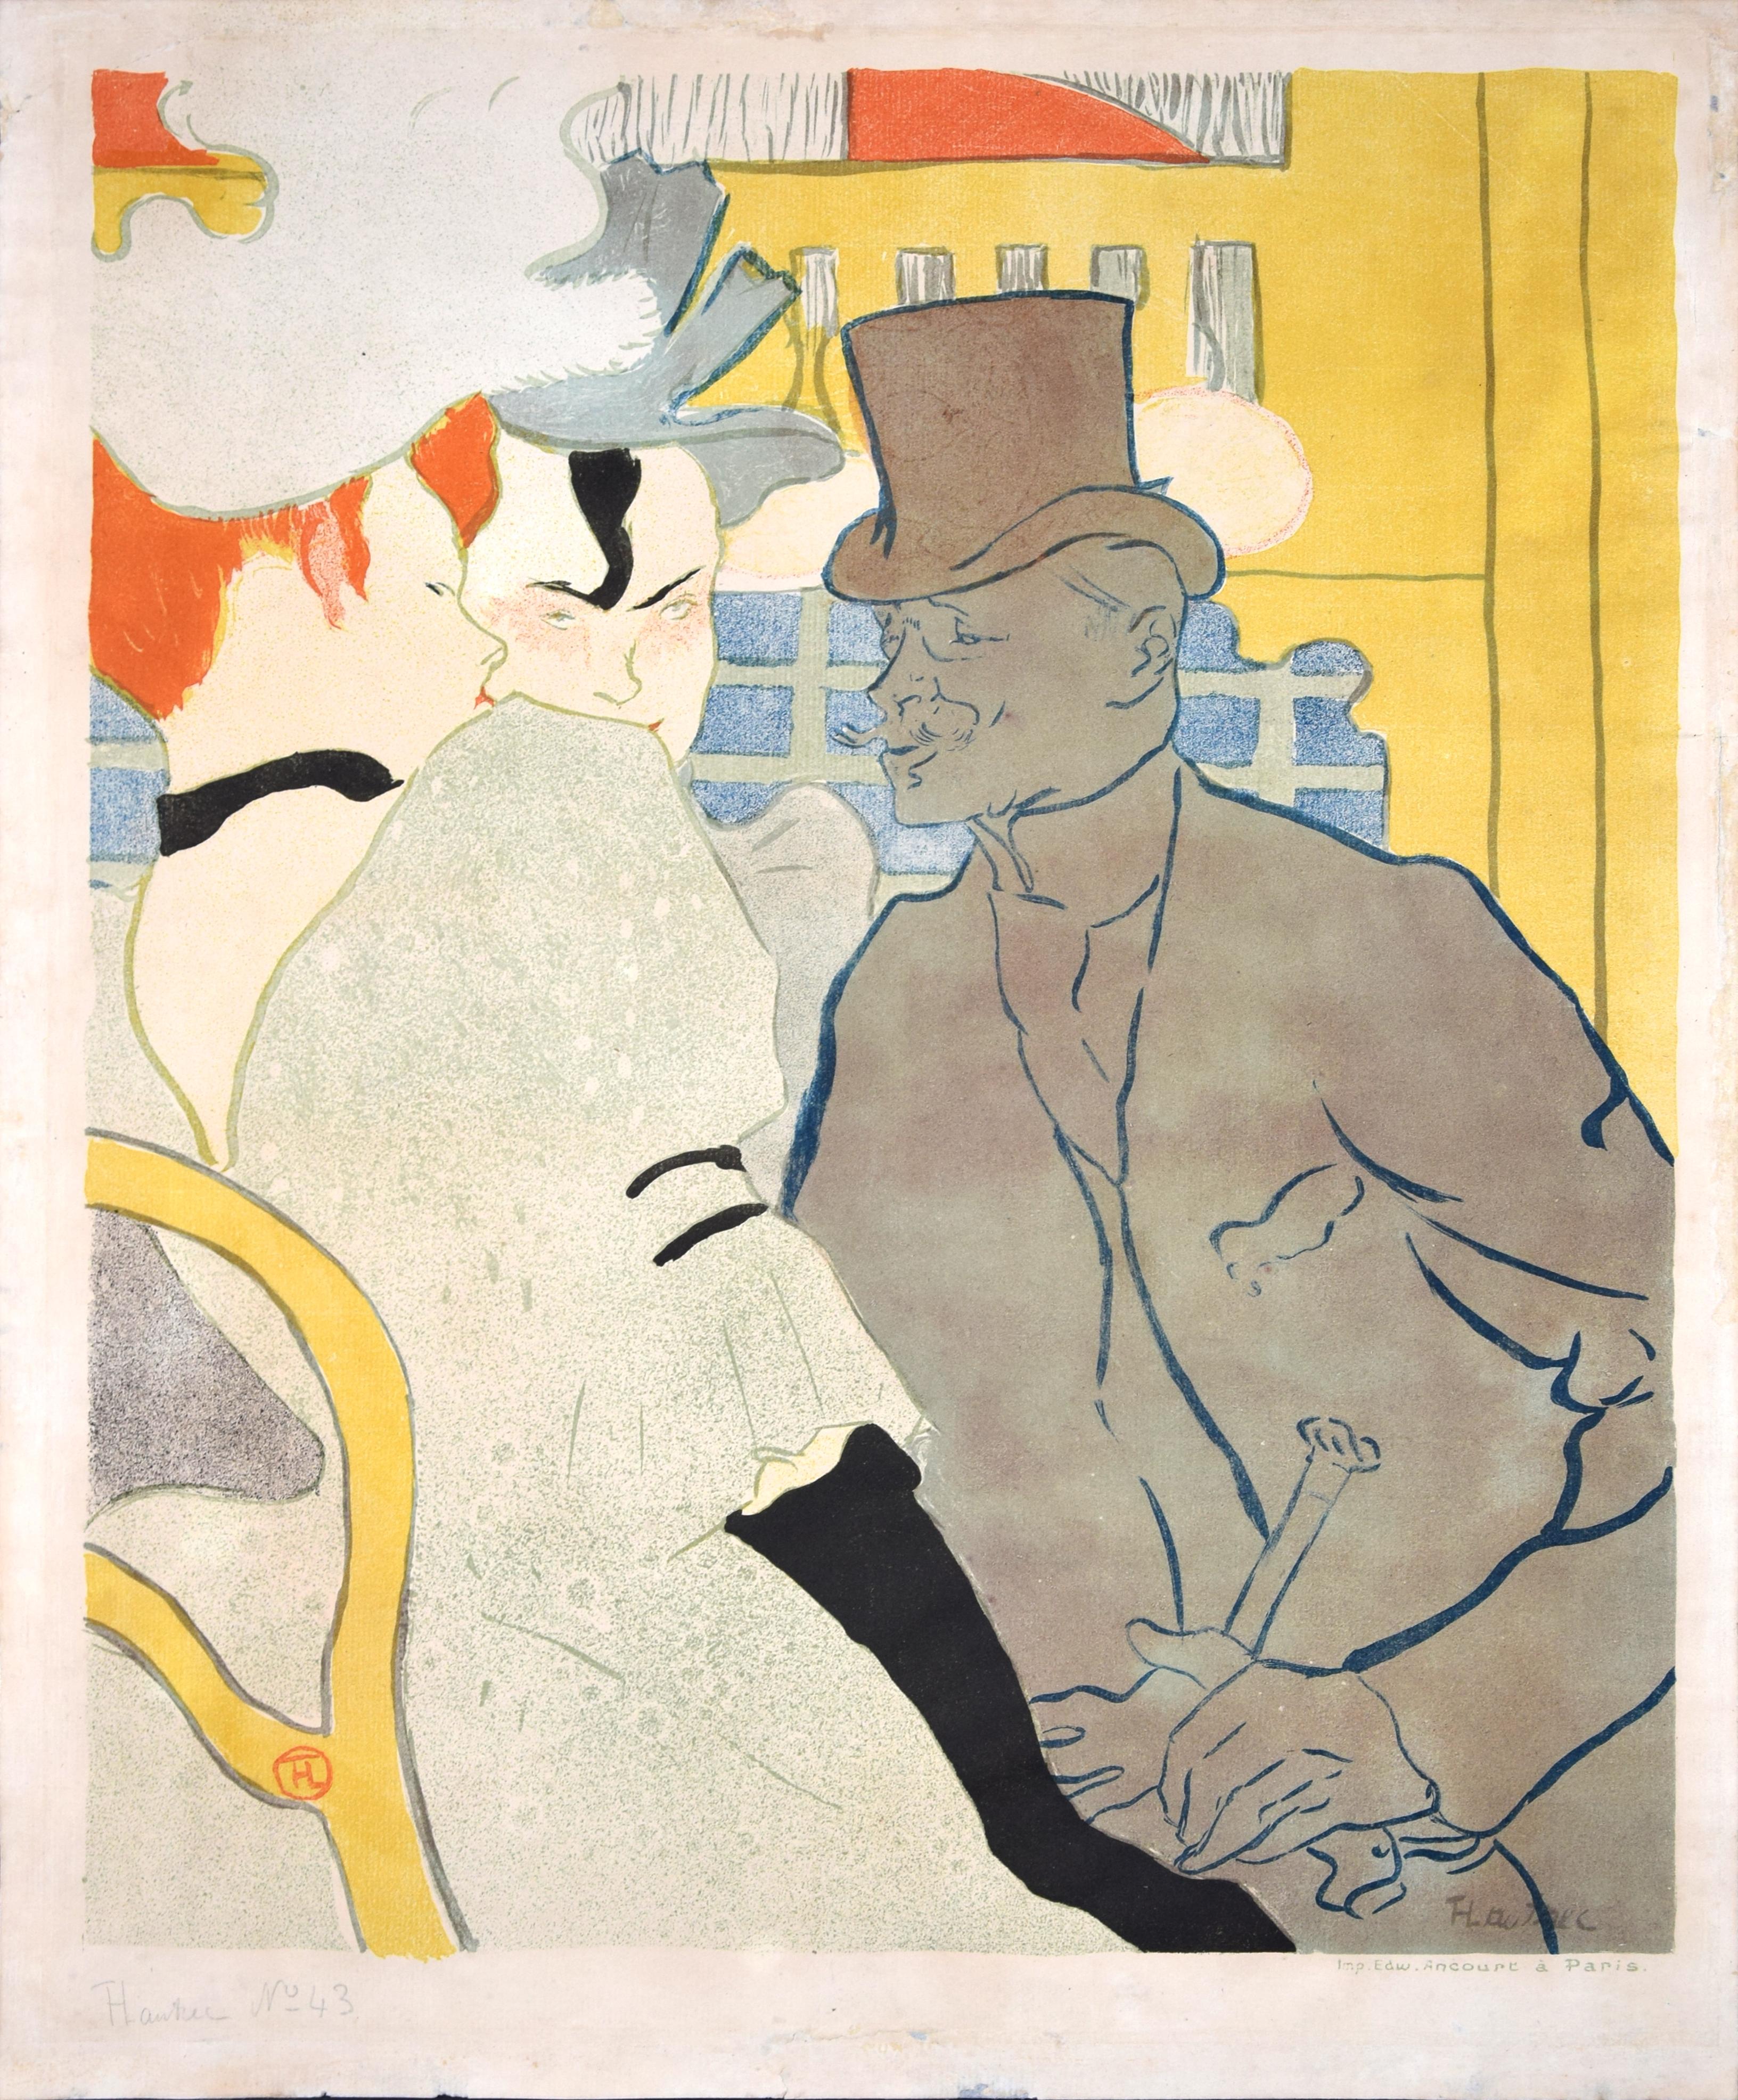 Englishman at the Moulin Rouge - Original Lithograph by H. Toulouse-Lautrec 1892